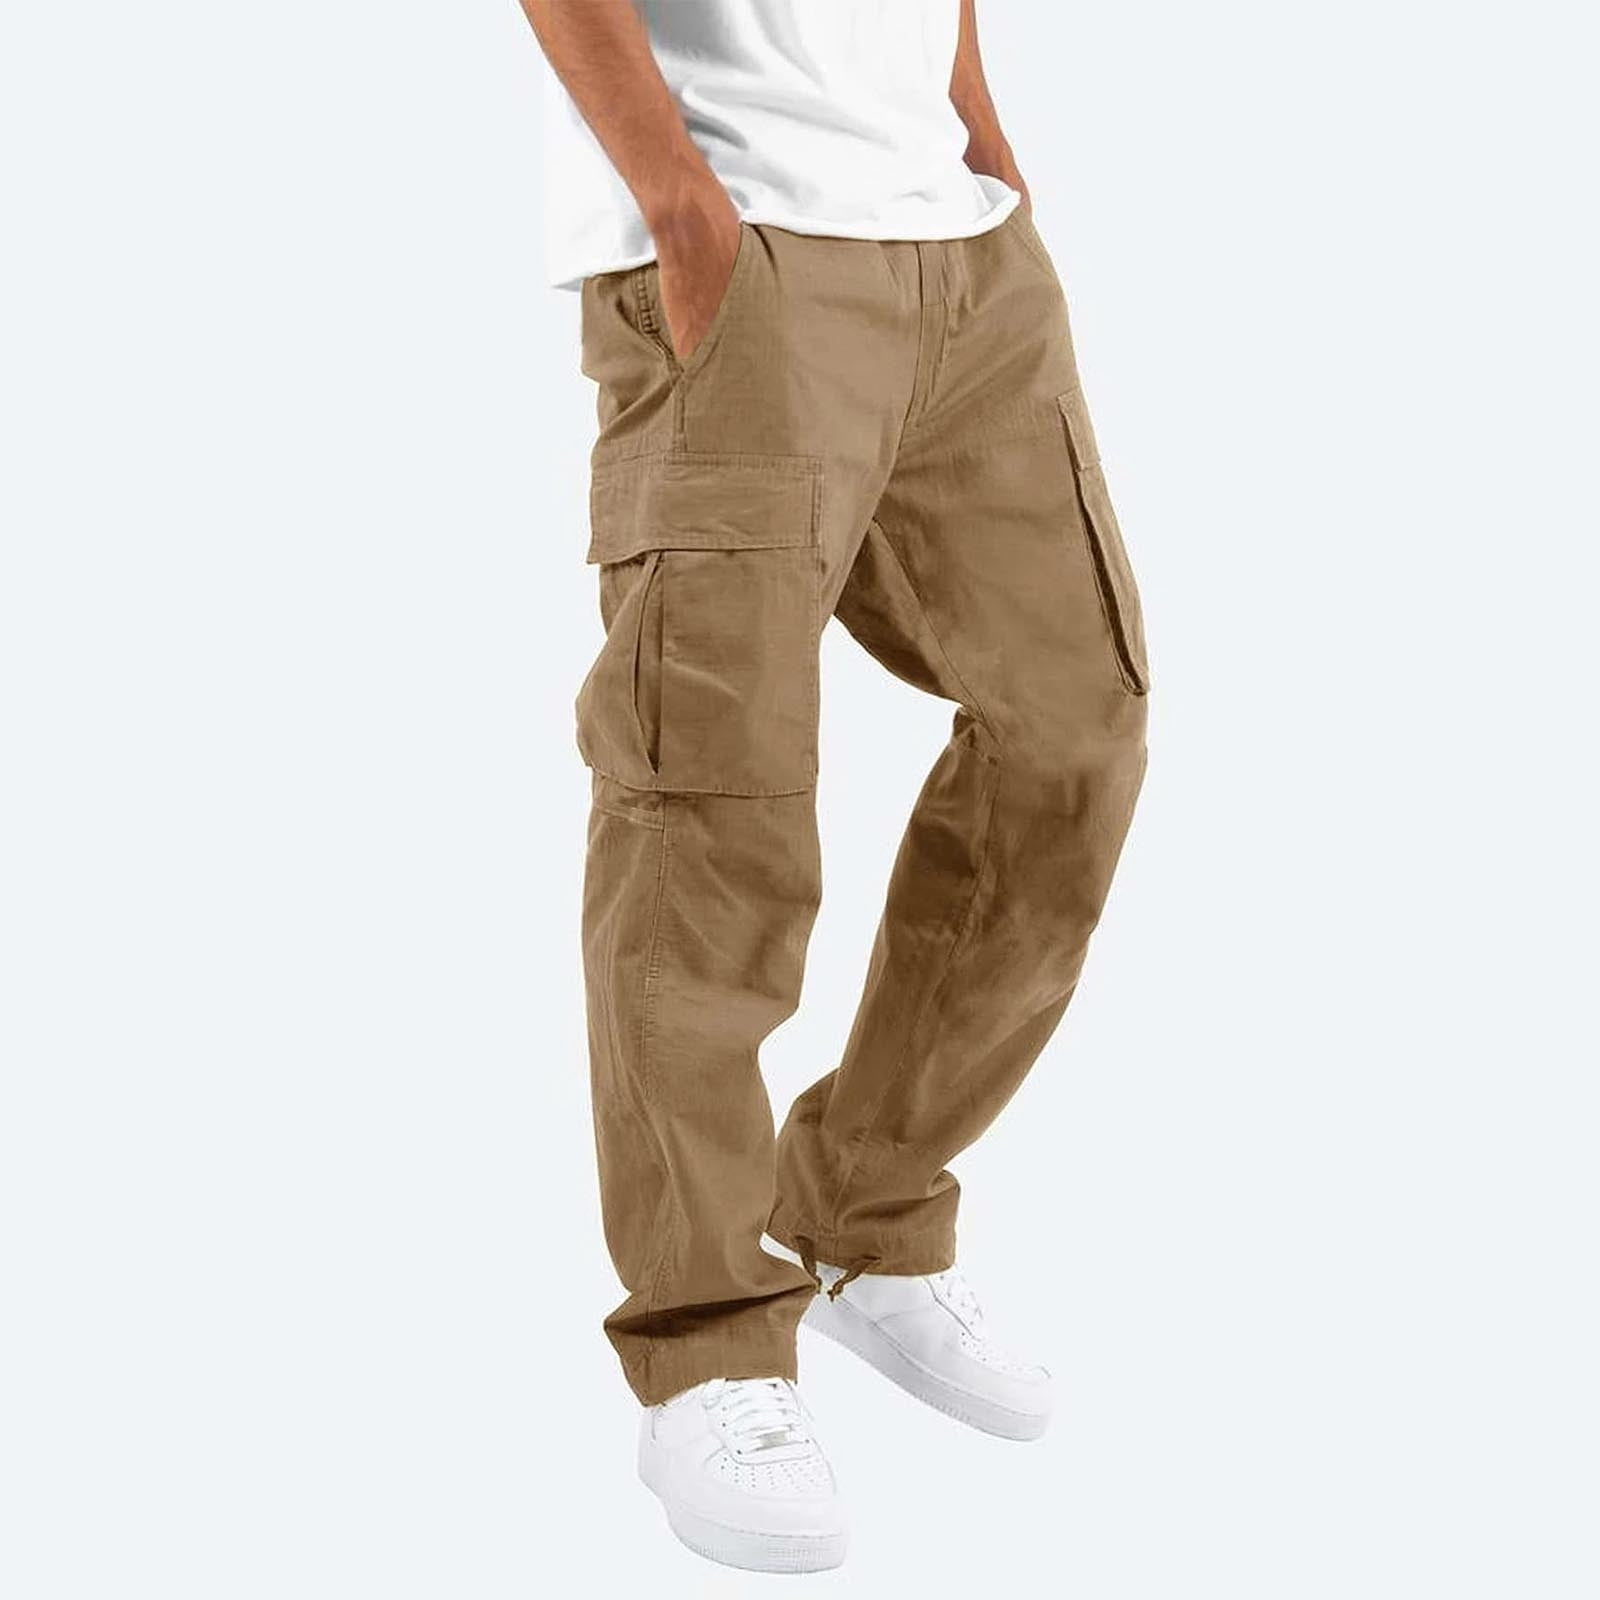 Fall Clearance Sale! RQYYD Mens Lightweight Cargo Pants with Multiple  Pockets Slim Fit Stretchy Comfort Breathable Outdoor Casual Plus Size  Trousers